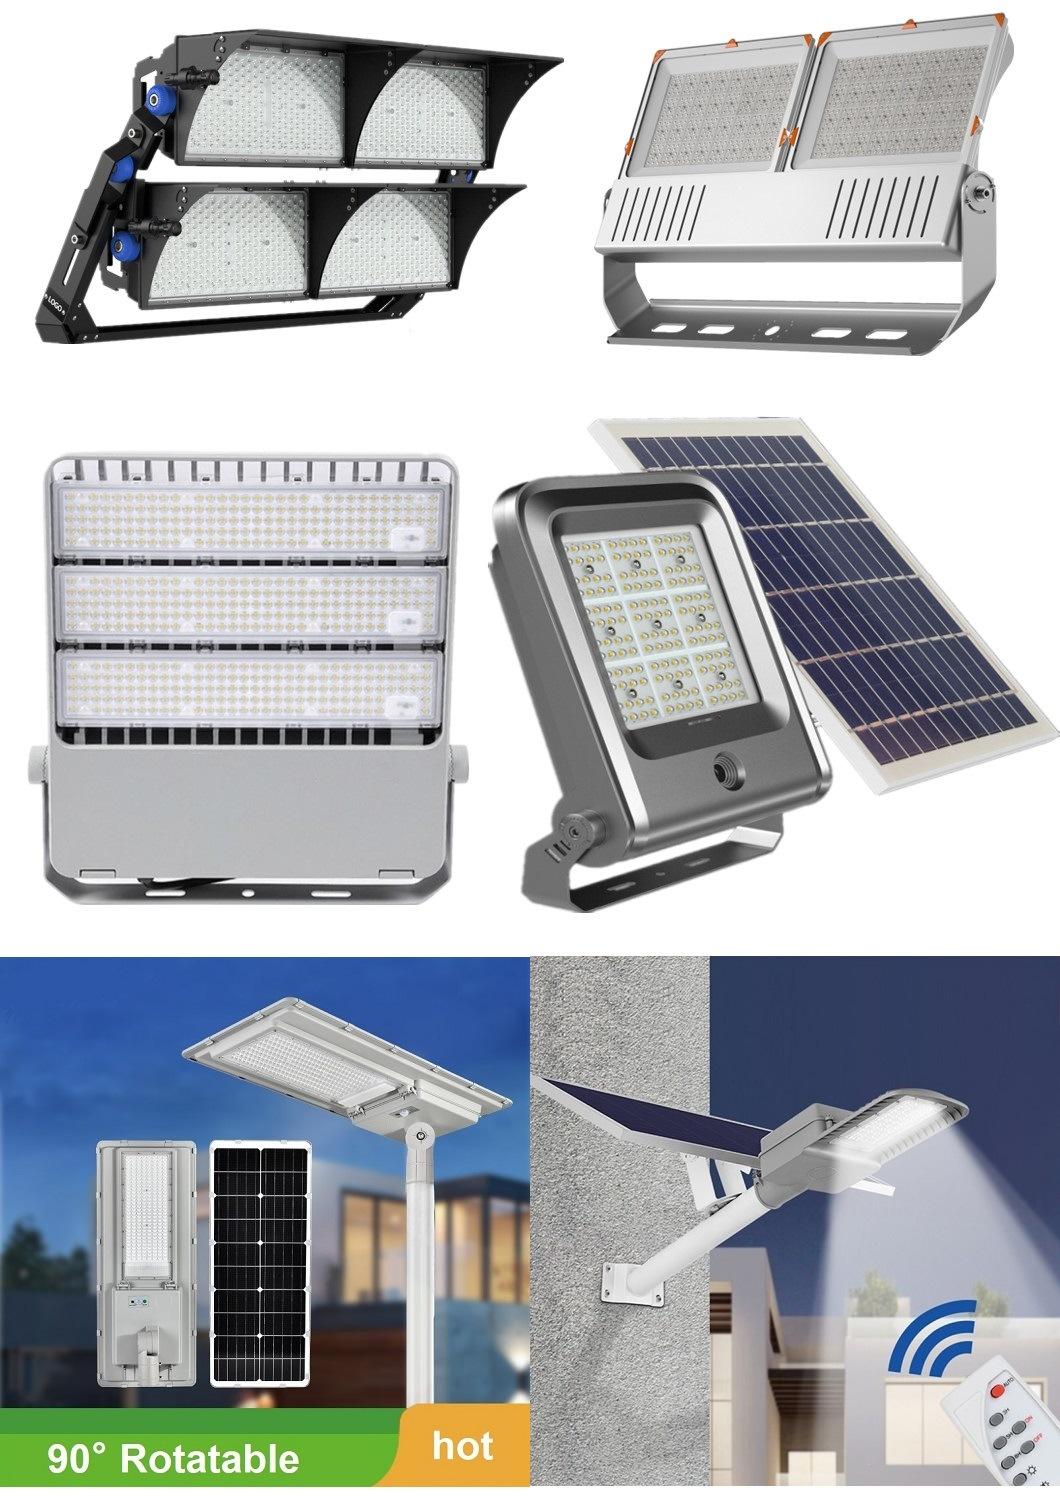 Solar Lamp Outdoor LED Garden Light with Intelligent Human Body Induction Lighting Camera